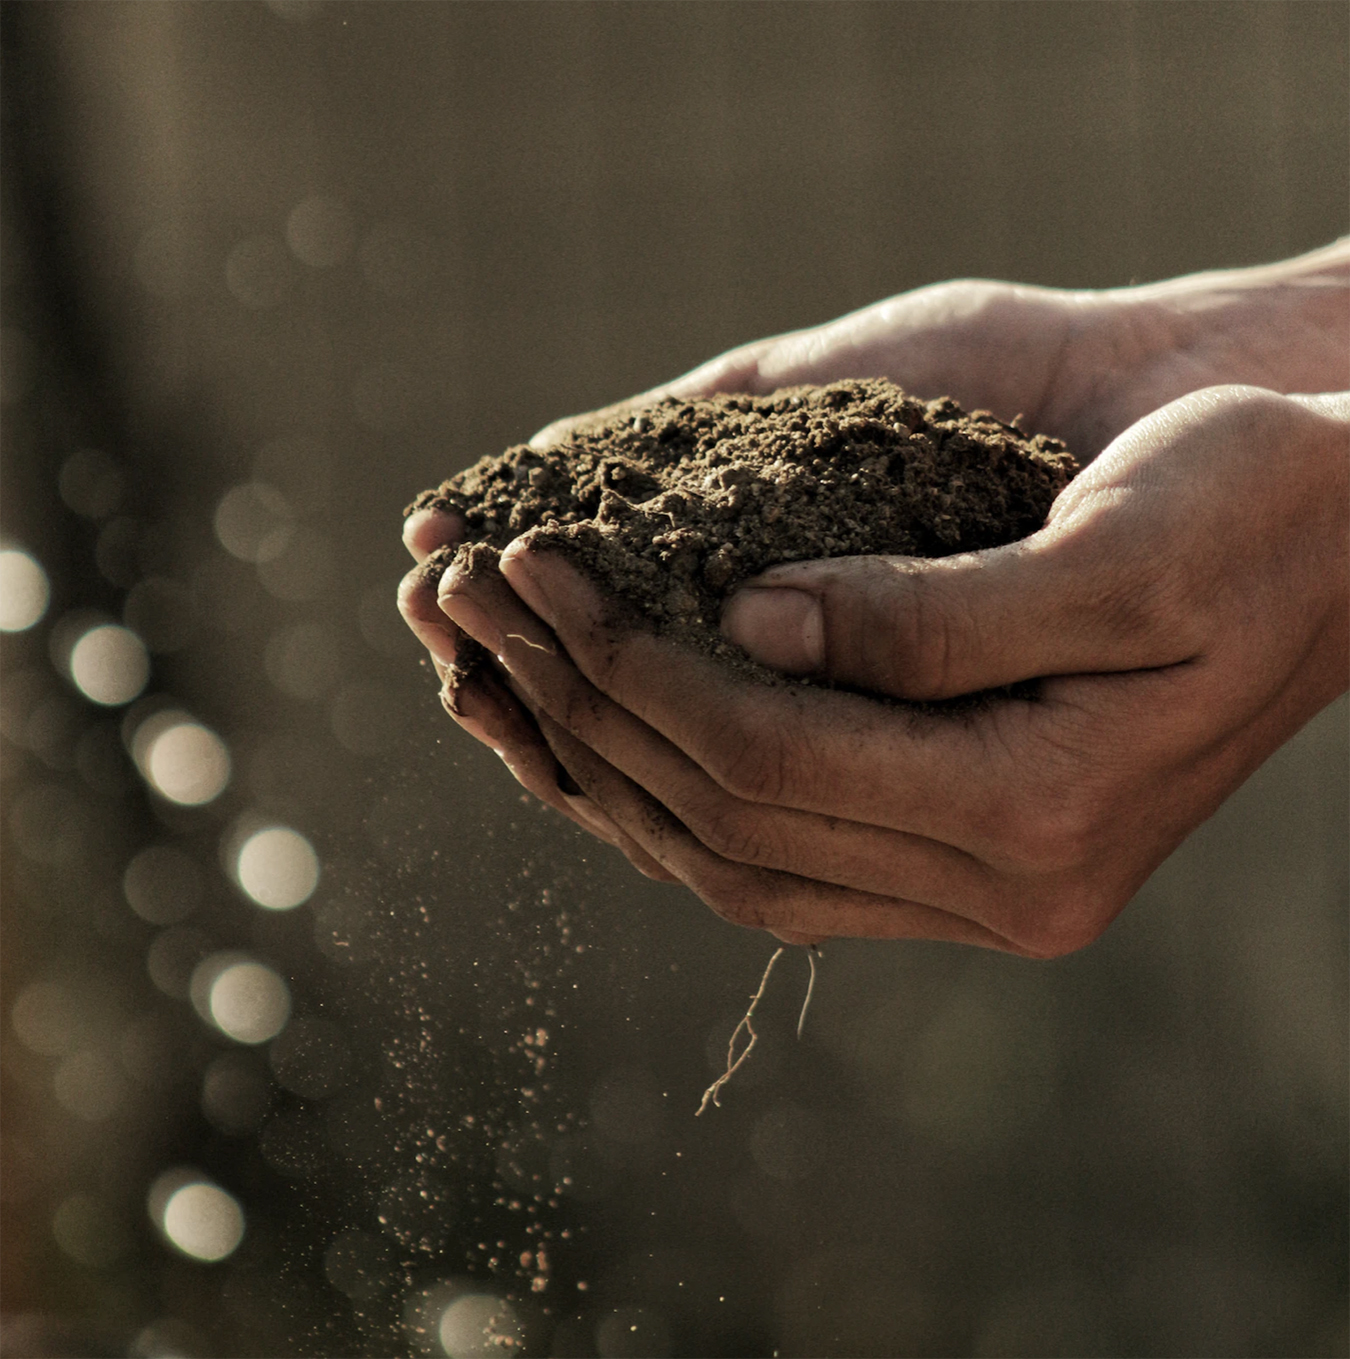 An image depicting a pair of cupped hands holding a pile of soil